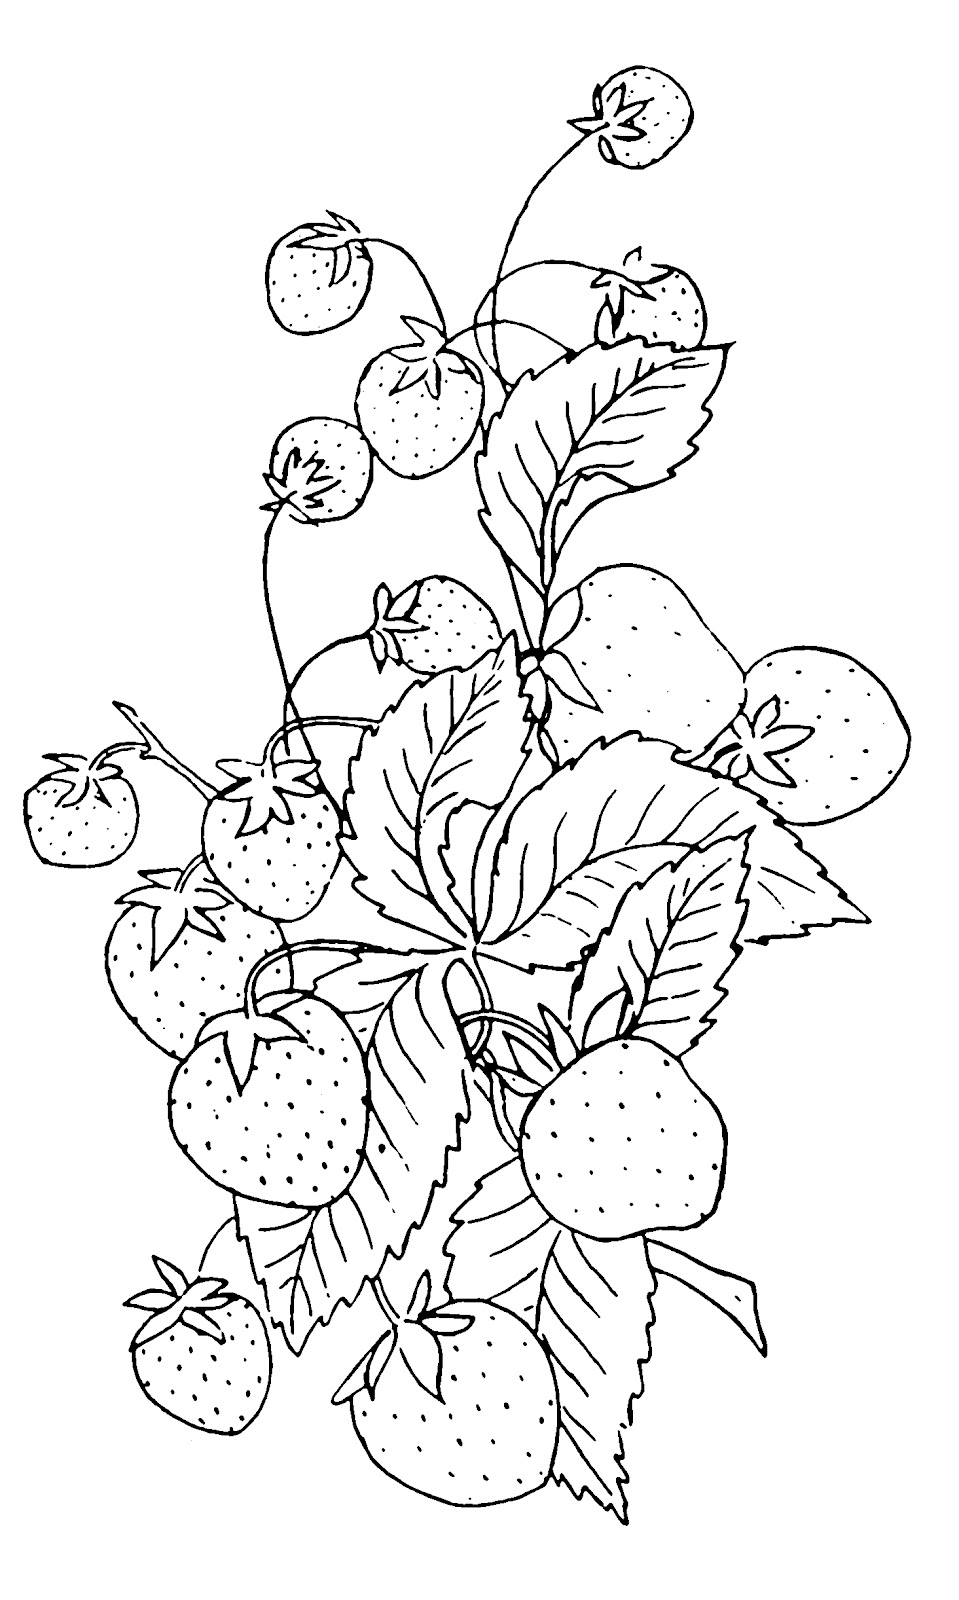 Vintage Clip Art - Strawberry Embroidery Pattern - The Graphics Fairy